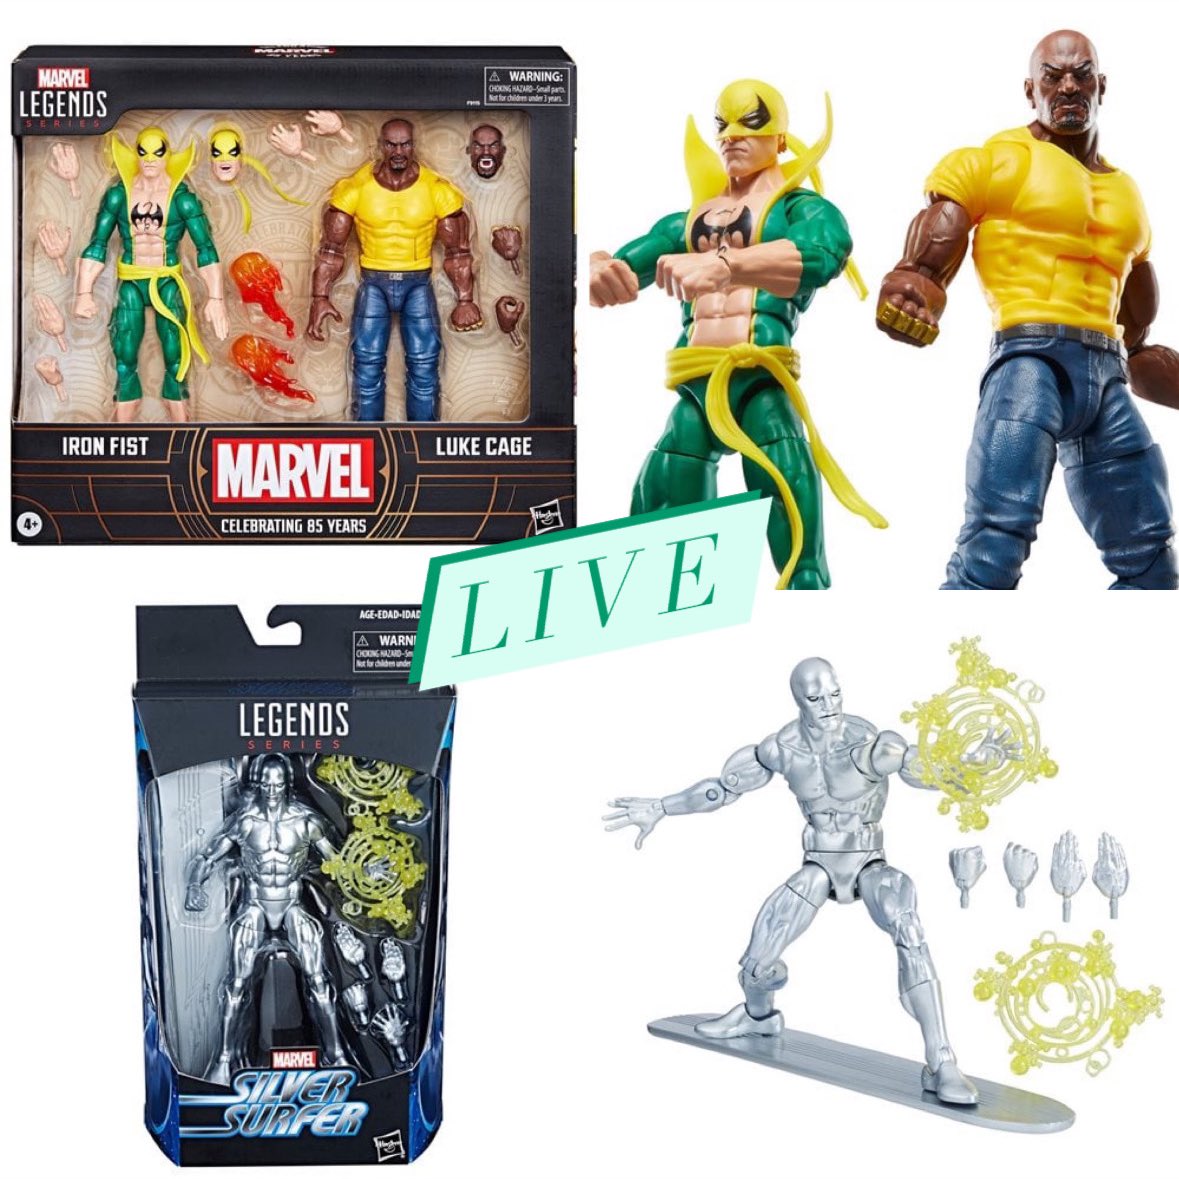 Now live! The newest Marvel Legends additions, with Silver Surfer and Iron Fist / Luke Cage 2 Pack! EE ~ fnkpp.com/EELeg Amzn ~ amzn.to/44dSTd5 #Ad #FPN #FunkoPOPNews #Marvel #Legends #MarvelLegends #ActionFigure #Figure #StarWars #BlackSeries #Super7 #Hasbro